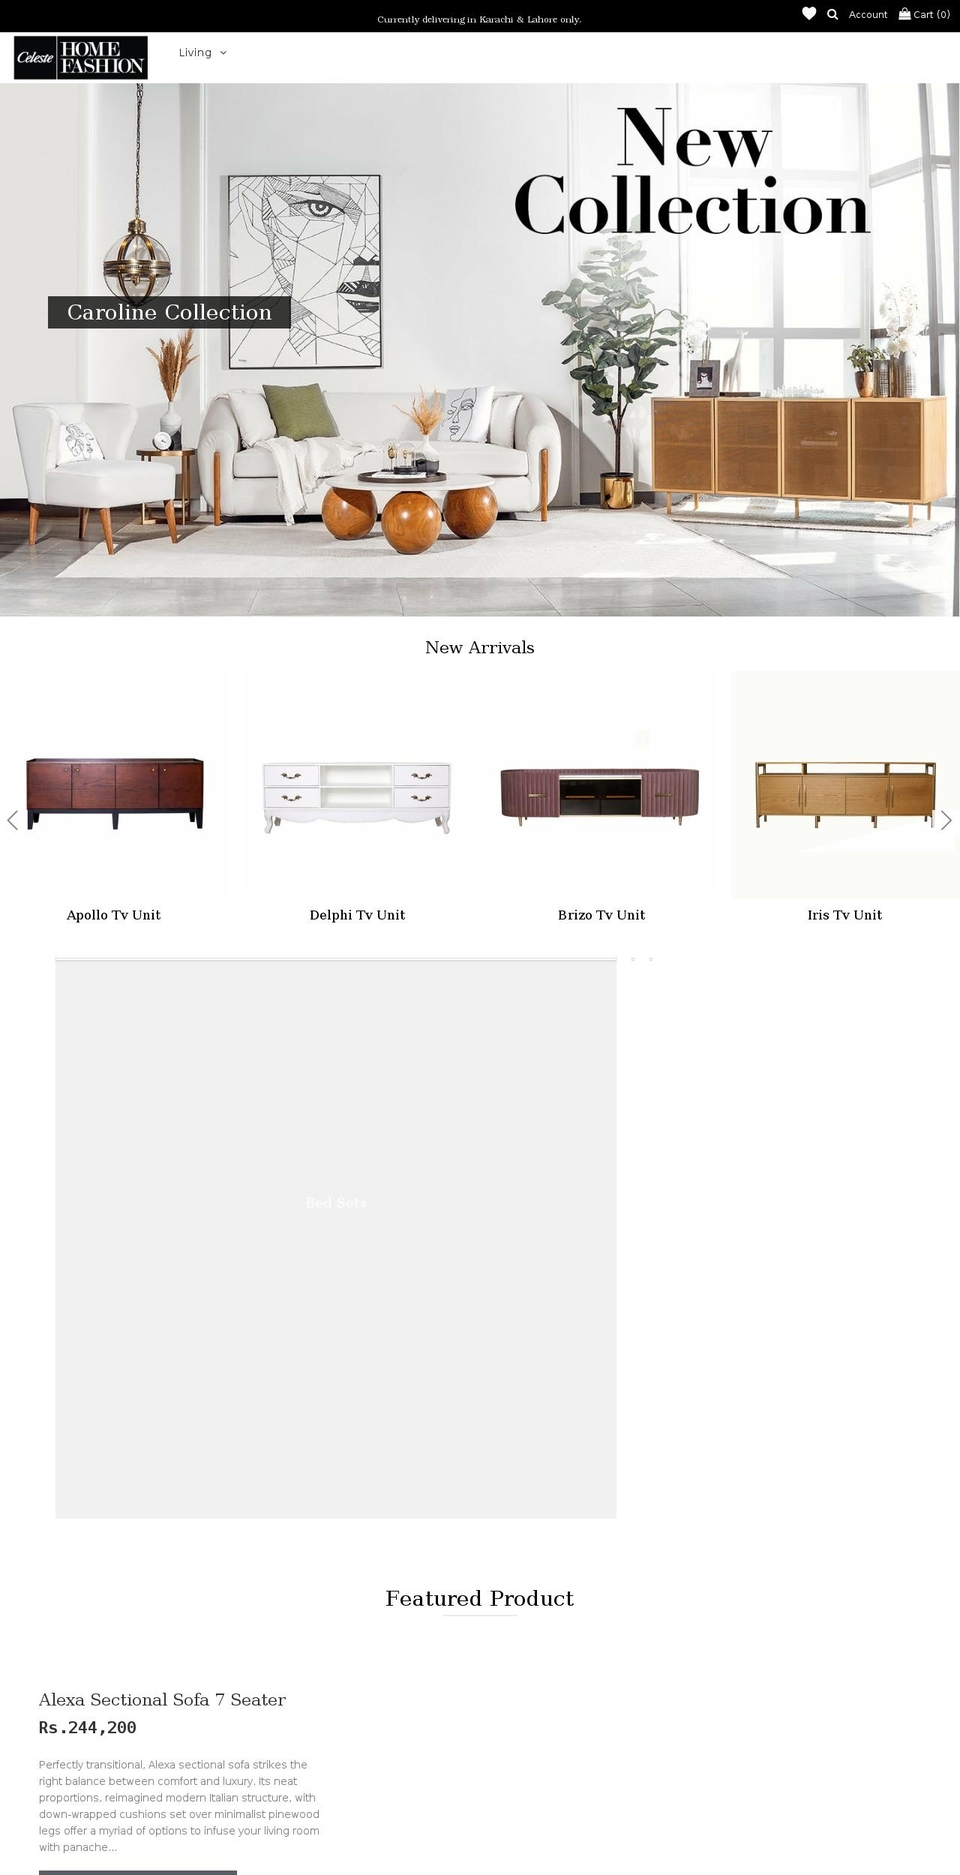 WATCHES Shopify theme site example celestehomefashion.com